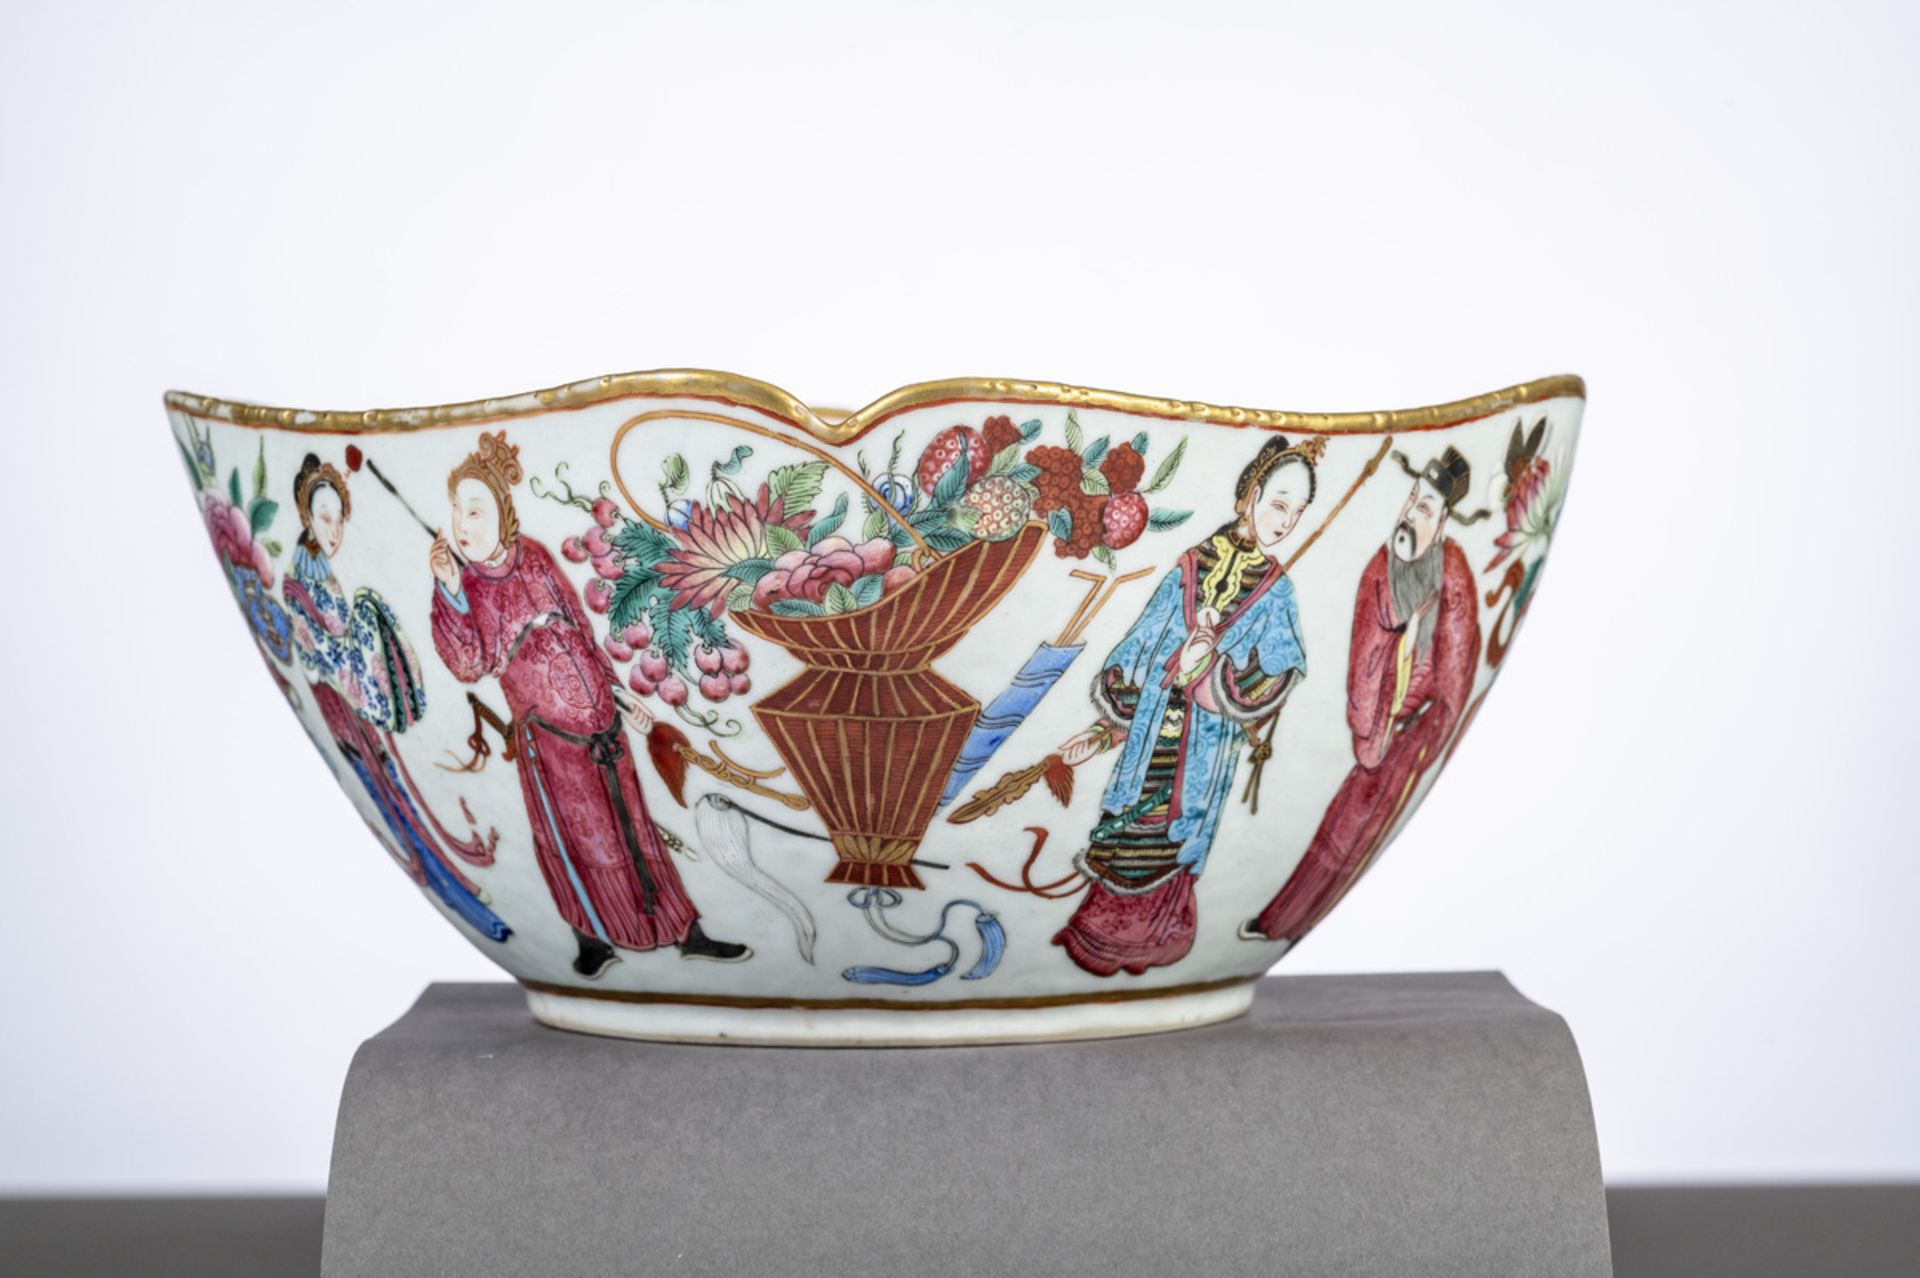 Lobed bowl in Chinese famille rose porcelain with gold rims 'characters', 19th century (11x24x24cm) - Bild 3 aus 5